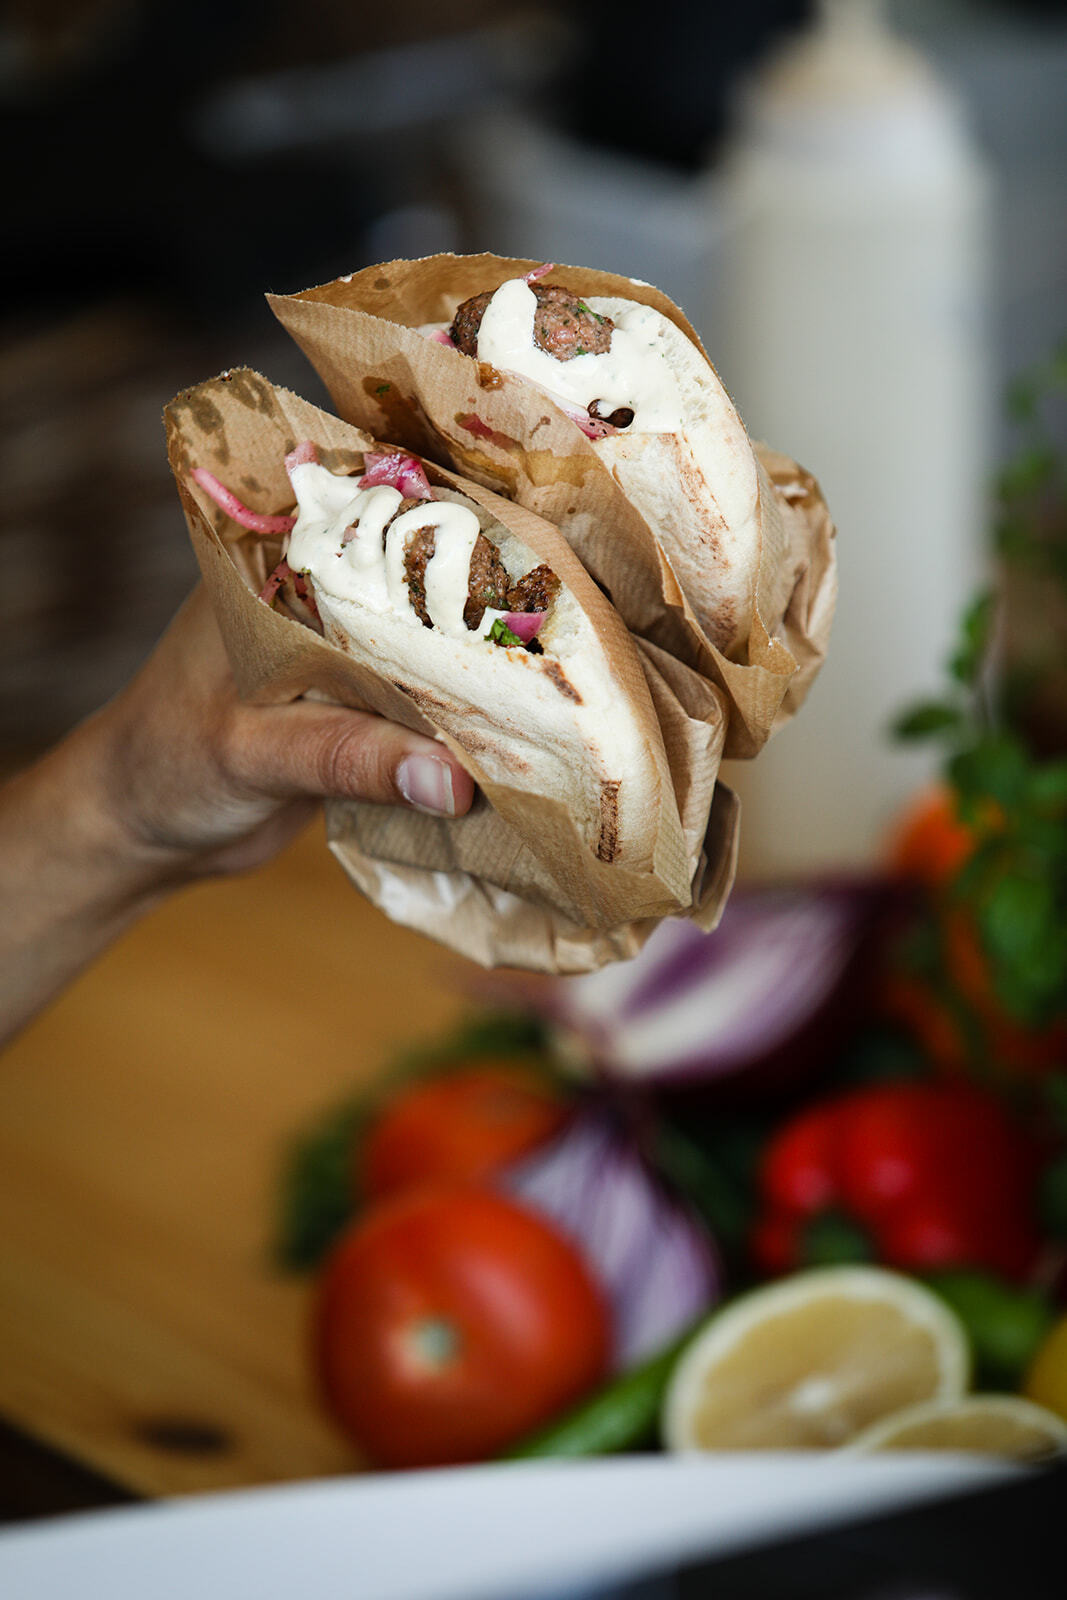 A pita made with Redefine Meat's plant-based lamb product, shown at the  FoodTech IL 2022 conference. (Tal Shahar and Achikam Ben-Yosef)